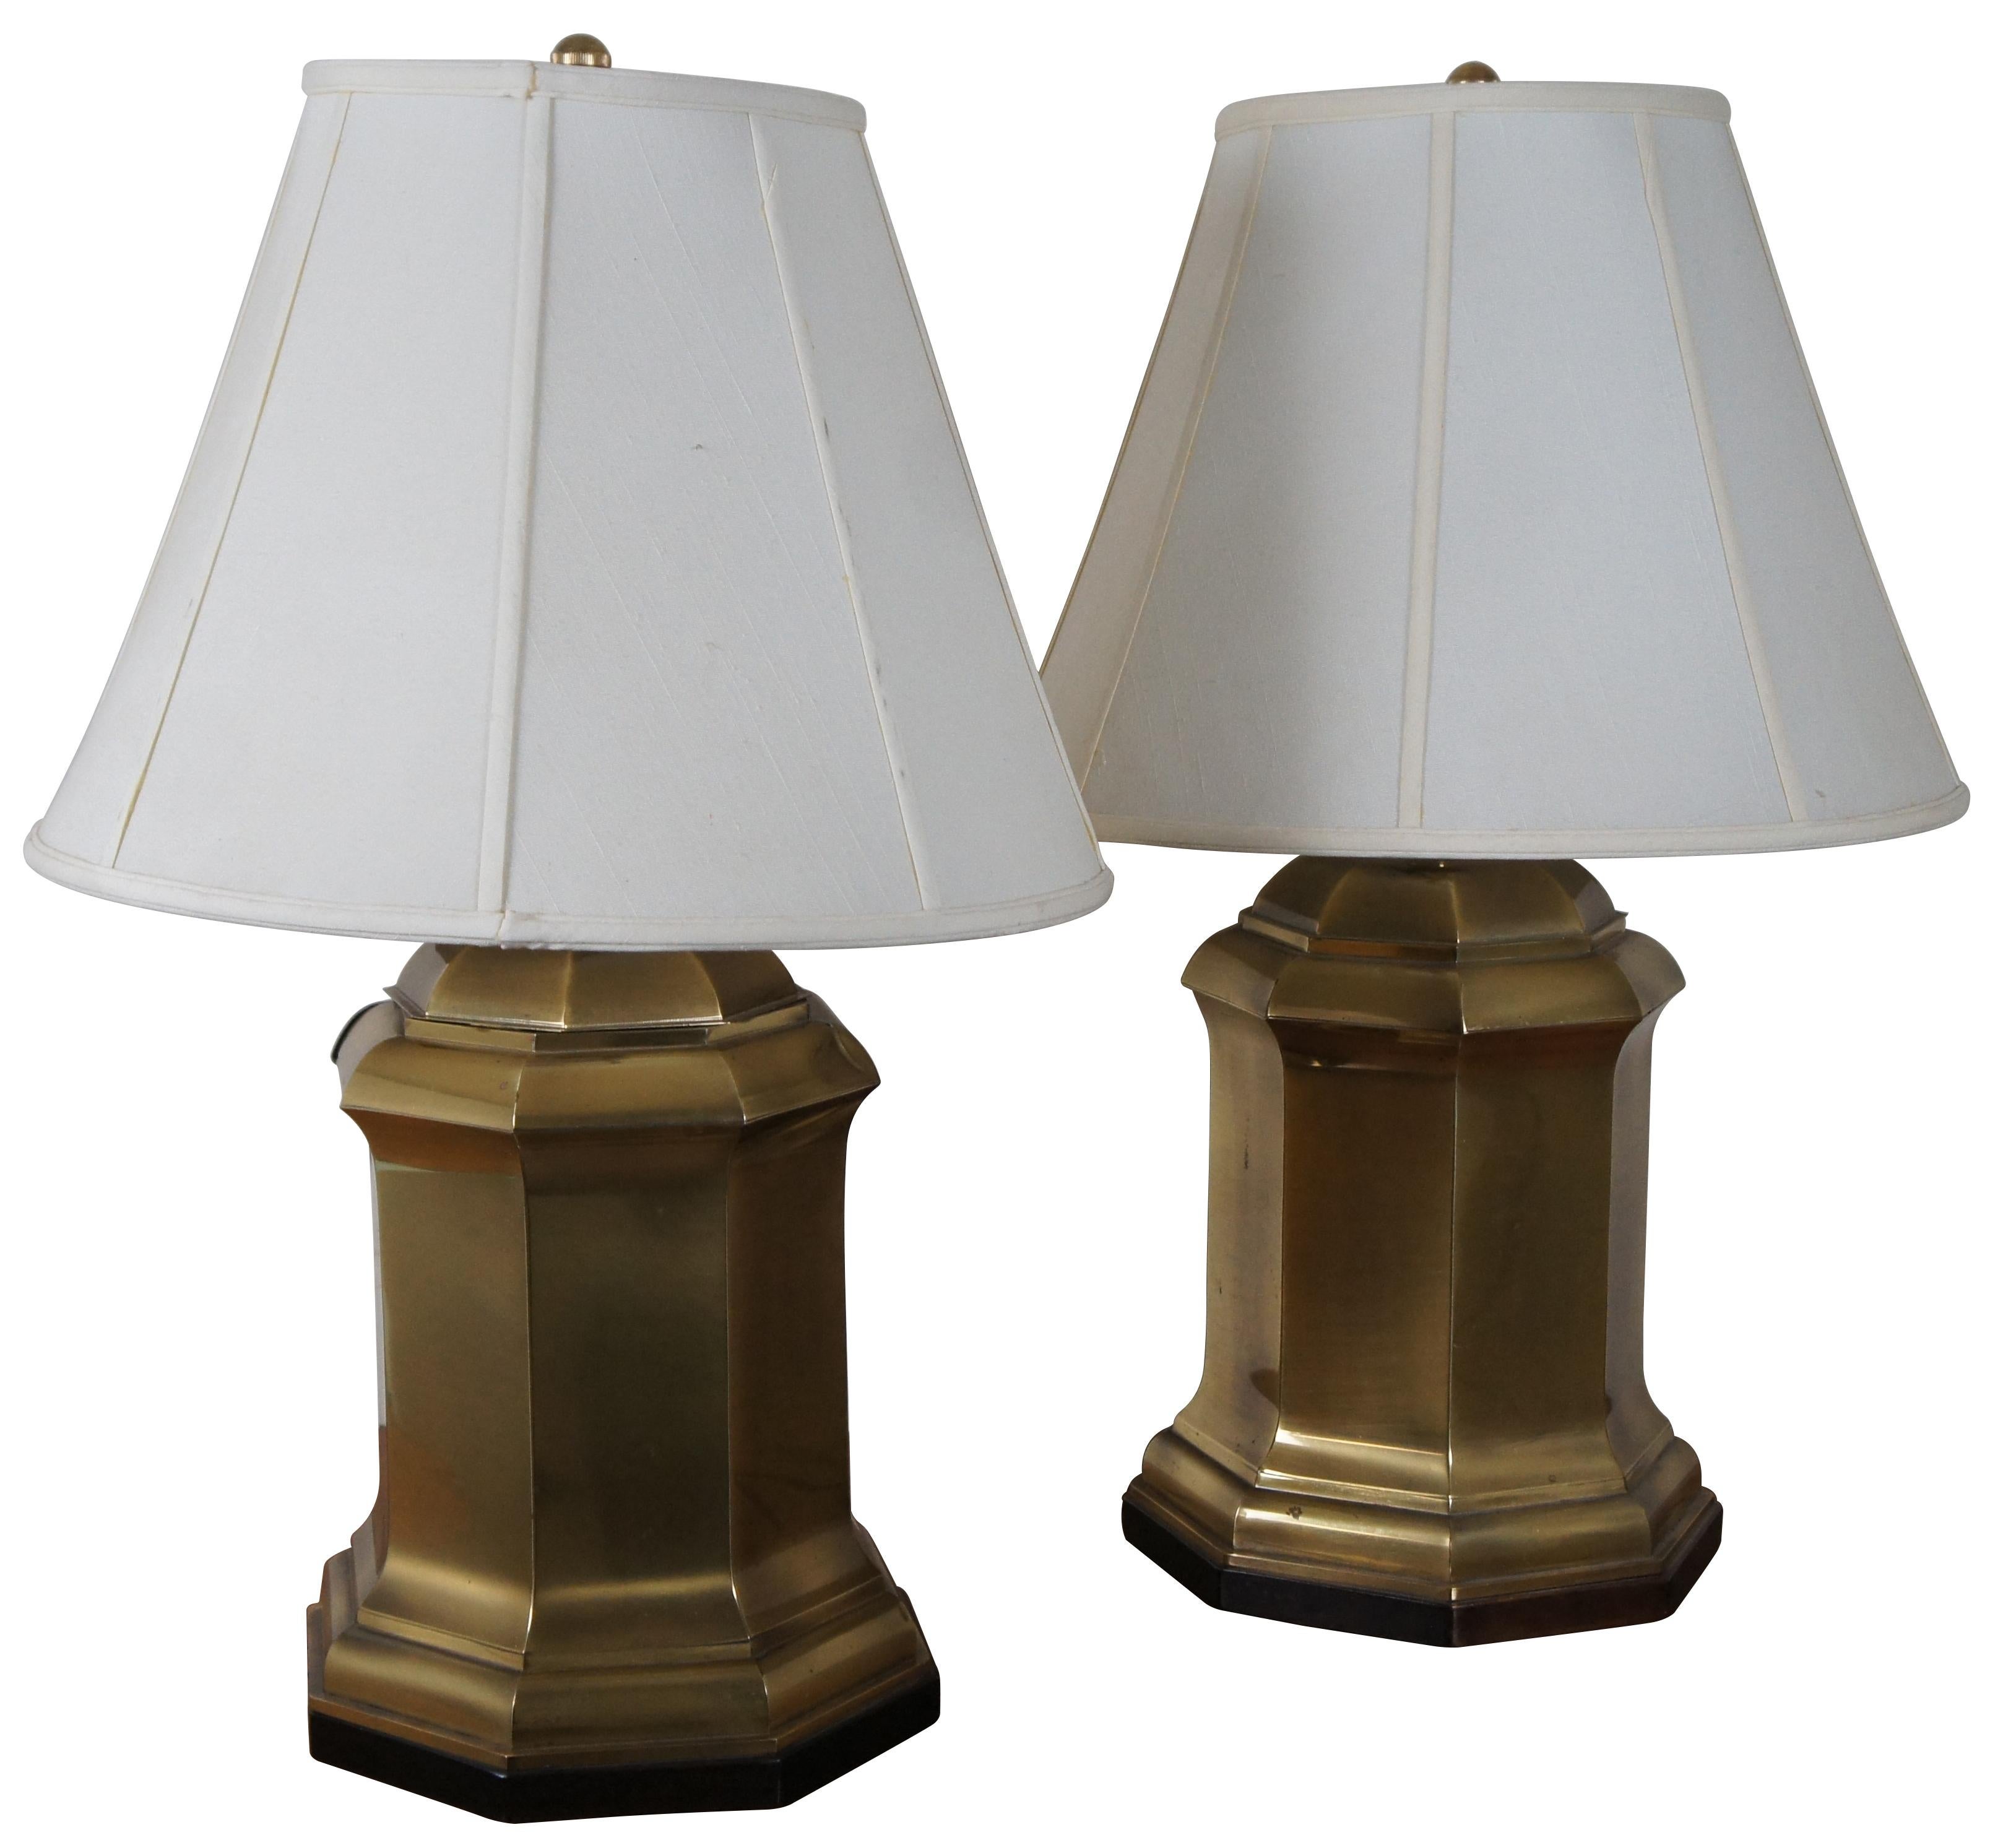 Pair of 1990s chinoiserie octagonal brass tea canister table lamps with white shades.

Measures: 11.5” x 18” / shade - 18” x 13” / total height – 29” (diameter x height)